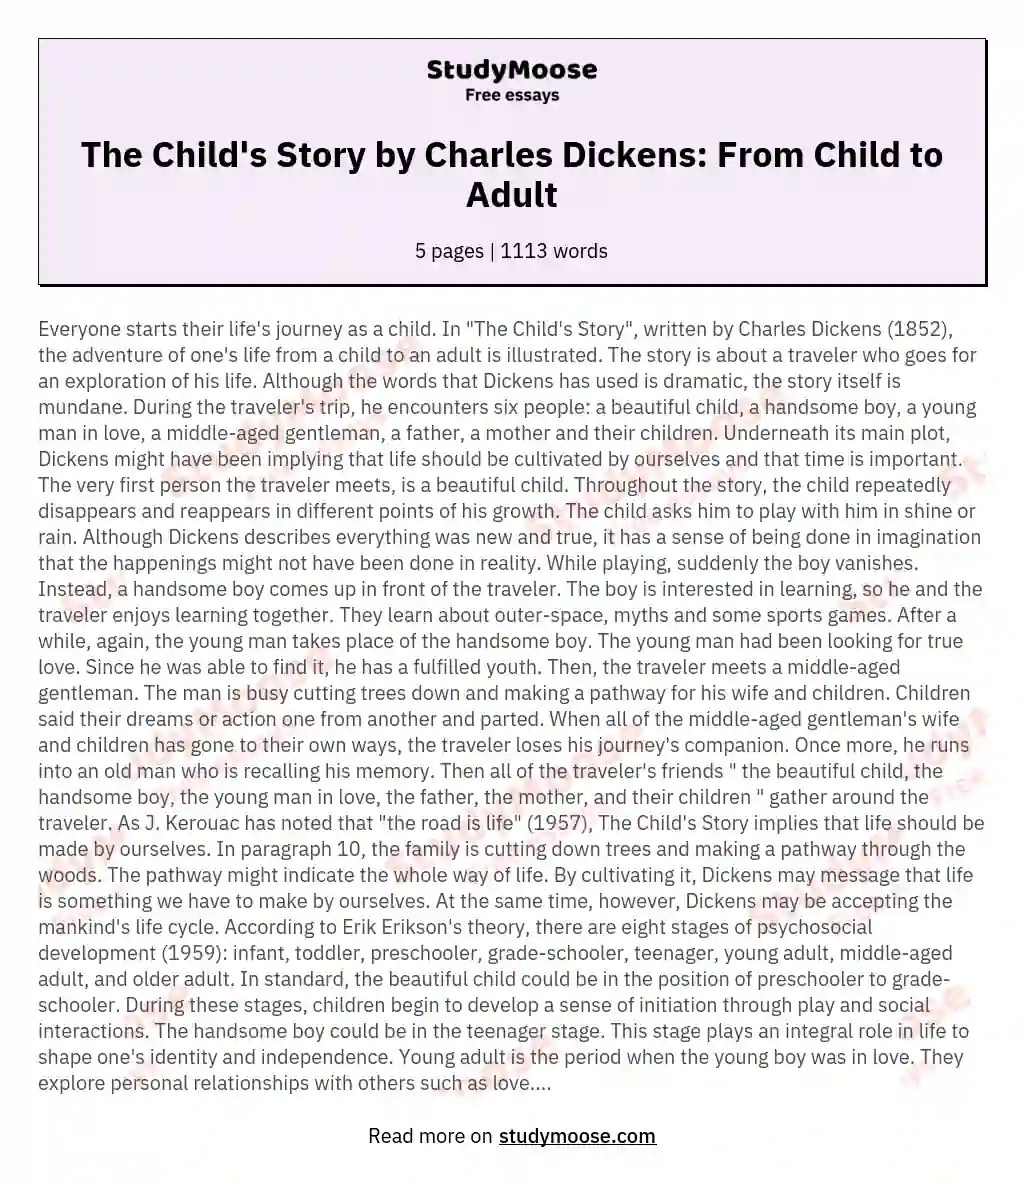 The Child's Story by Charles Dickens: From Child to Adult